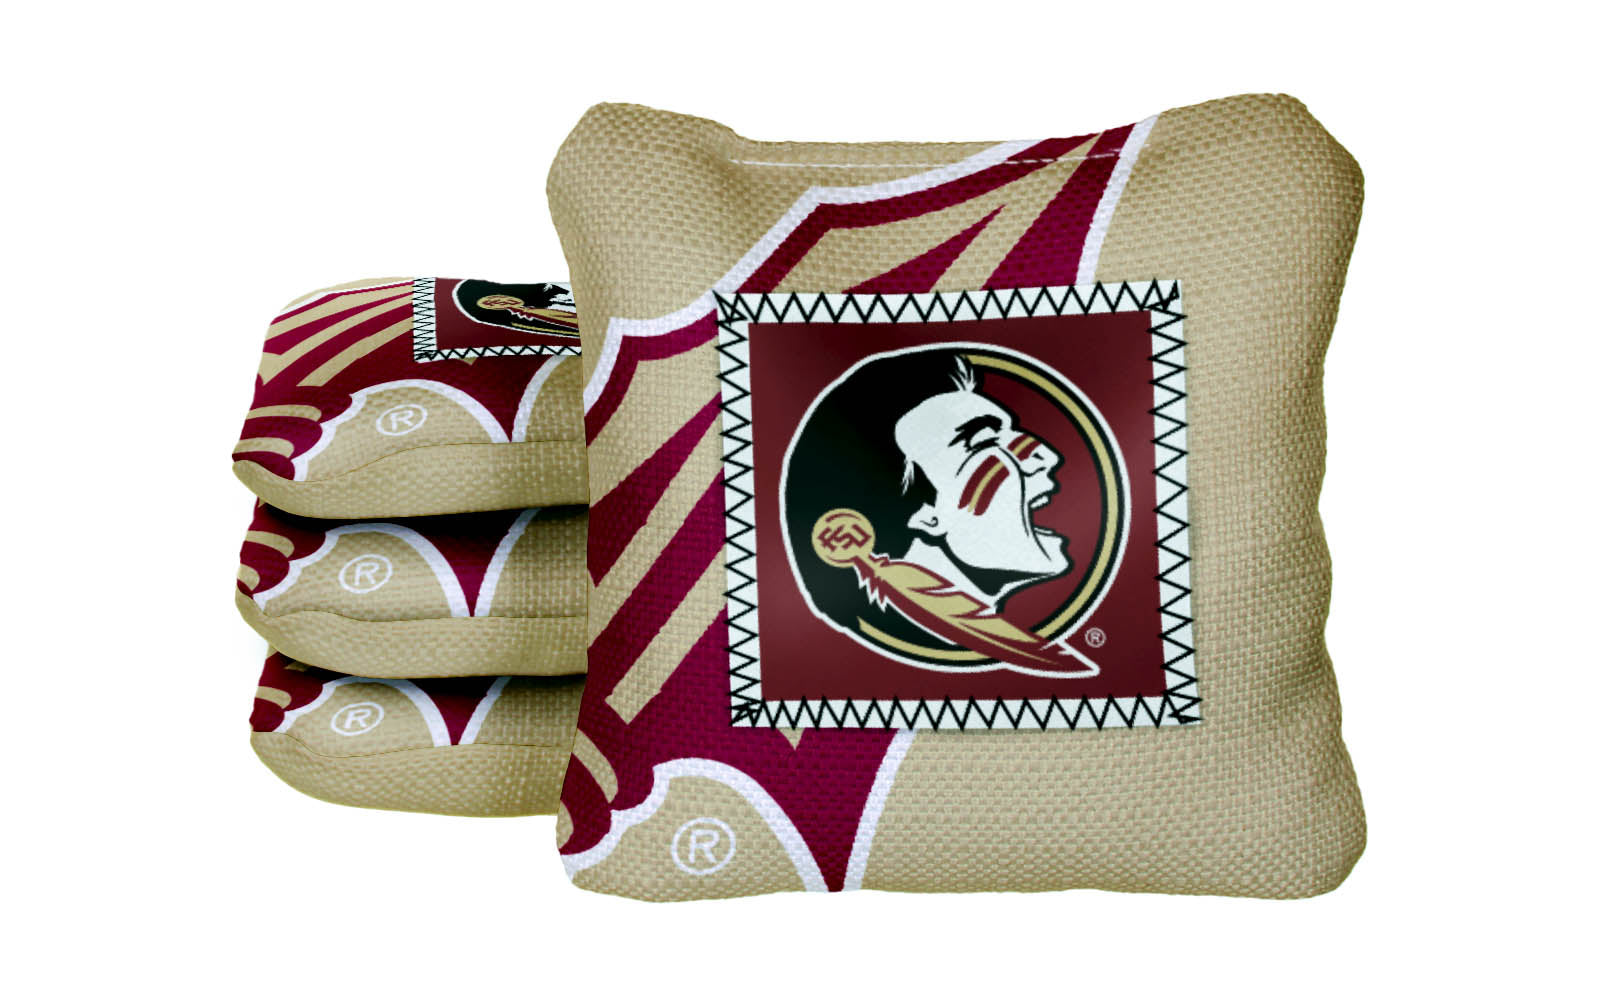 Officially Licensed Collegiate Cornhole Bags - AllCornhole Game Changers Steady 2.0 - Set of 4 - Florida State University